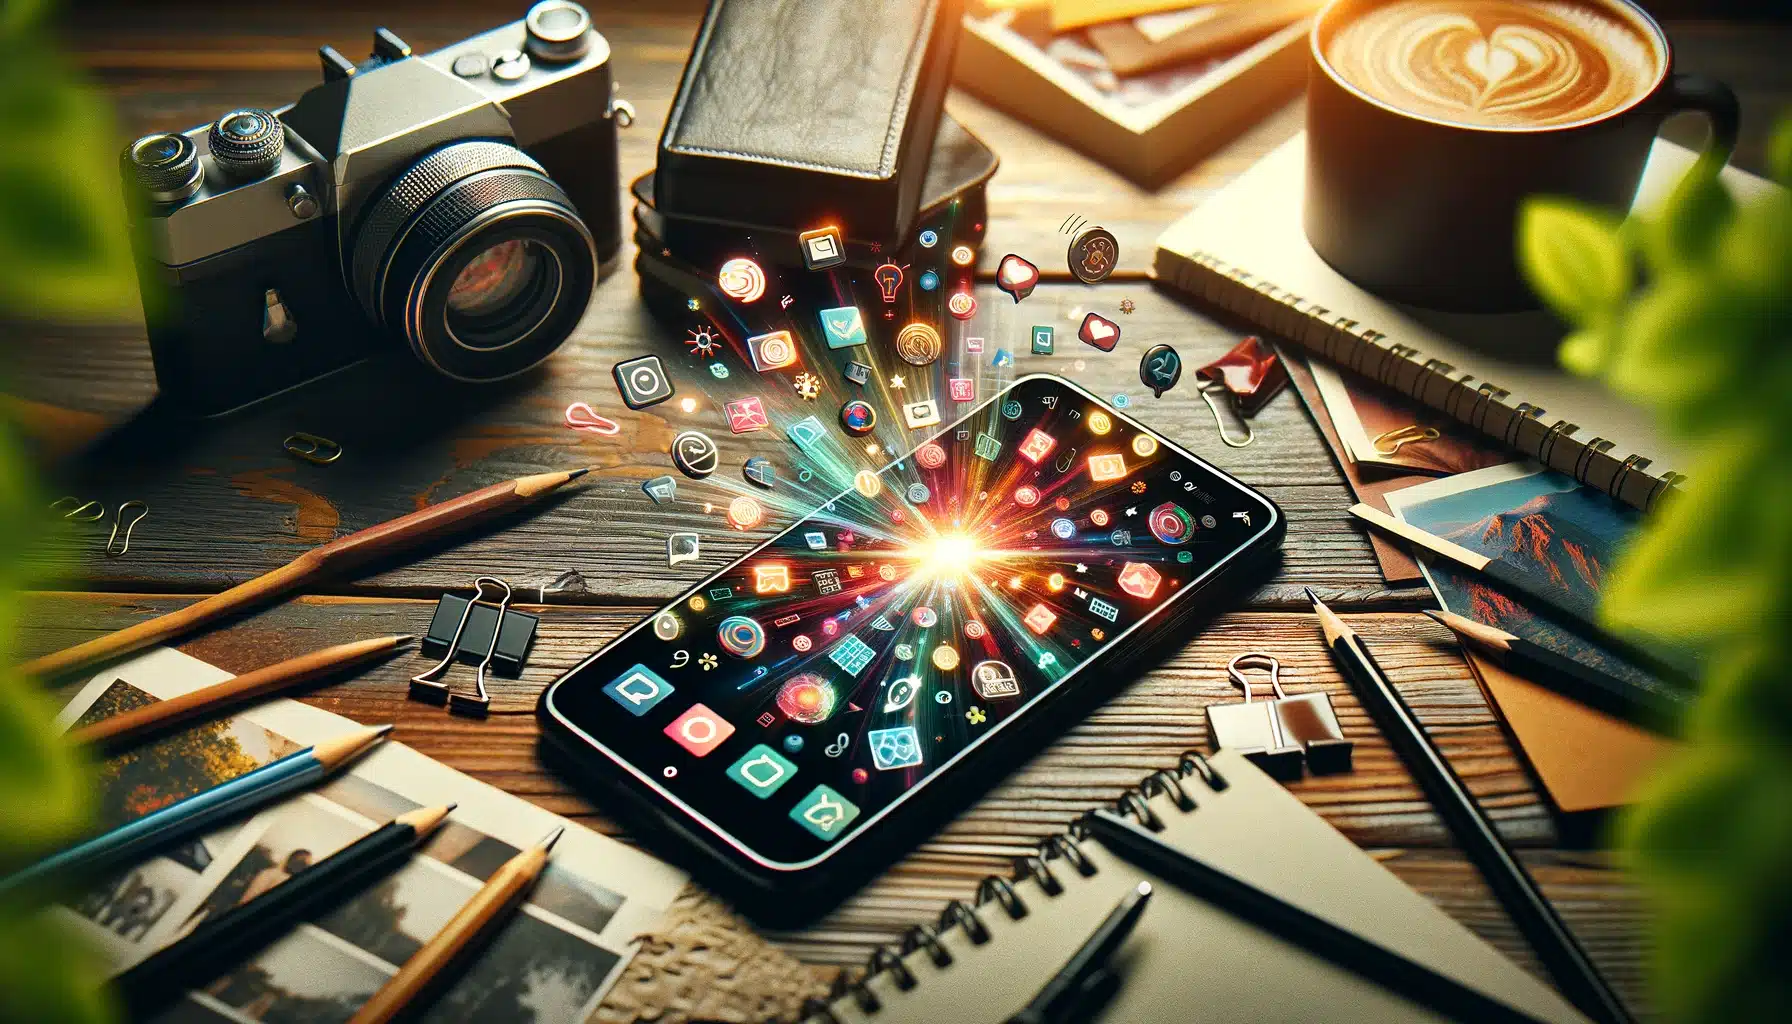 Smartphone on a desk displaying abstract icons of photo editing apps, surrounded by photography equipment and notes, representing a guide to best mobile photo editing apps.